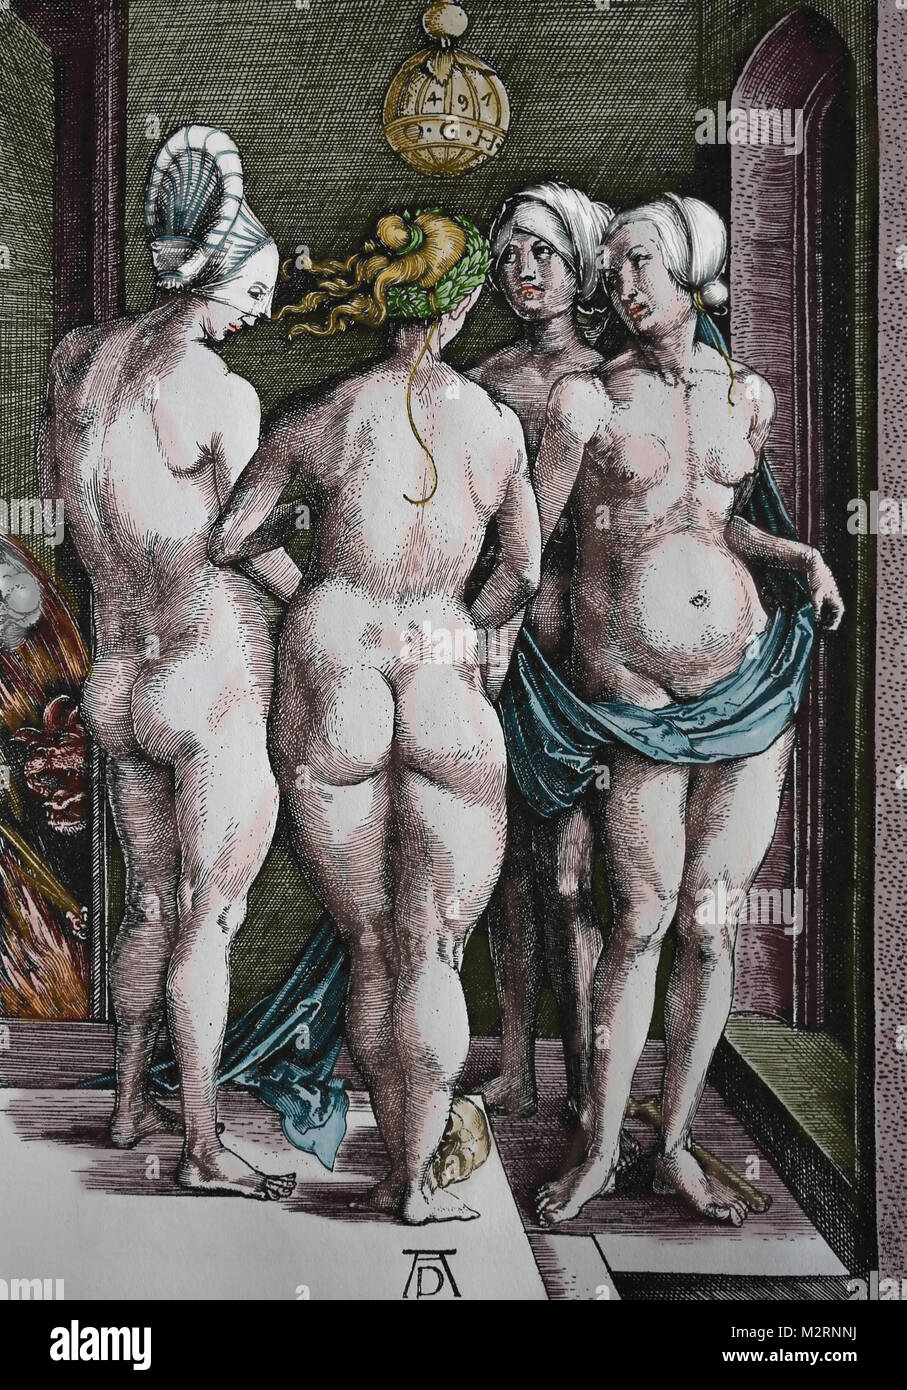 The 4 witches. Engraving by Alberch Durer (1471-1528). Stock Photo